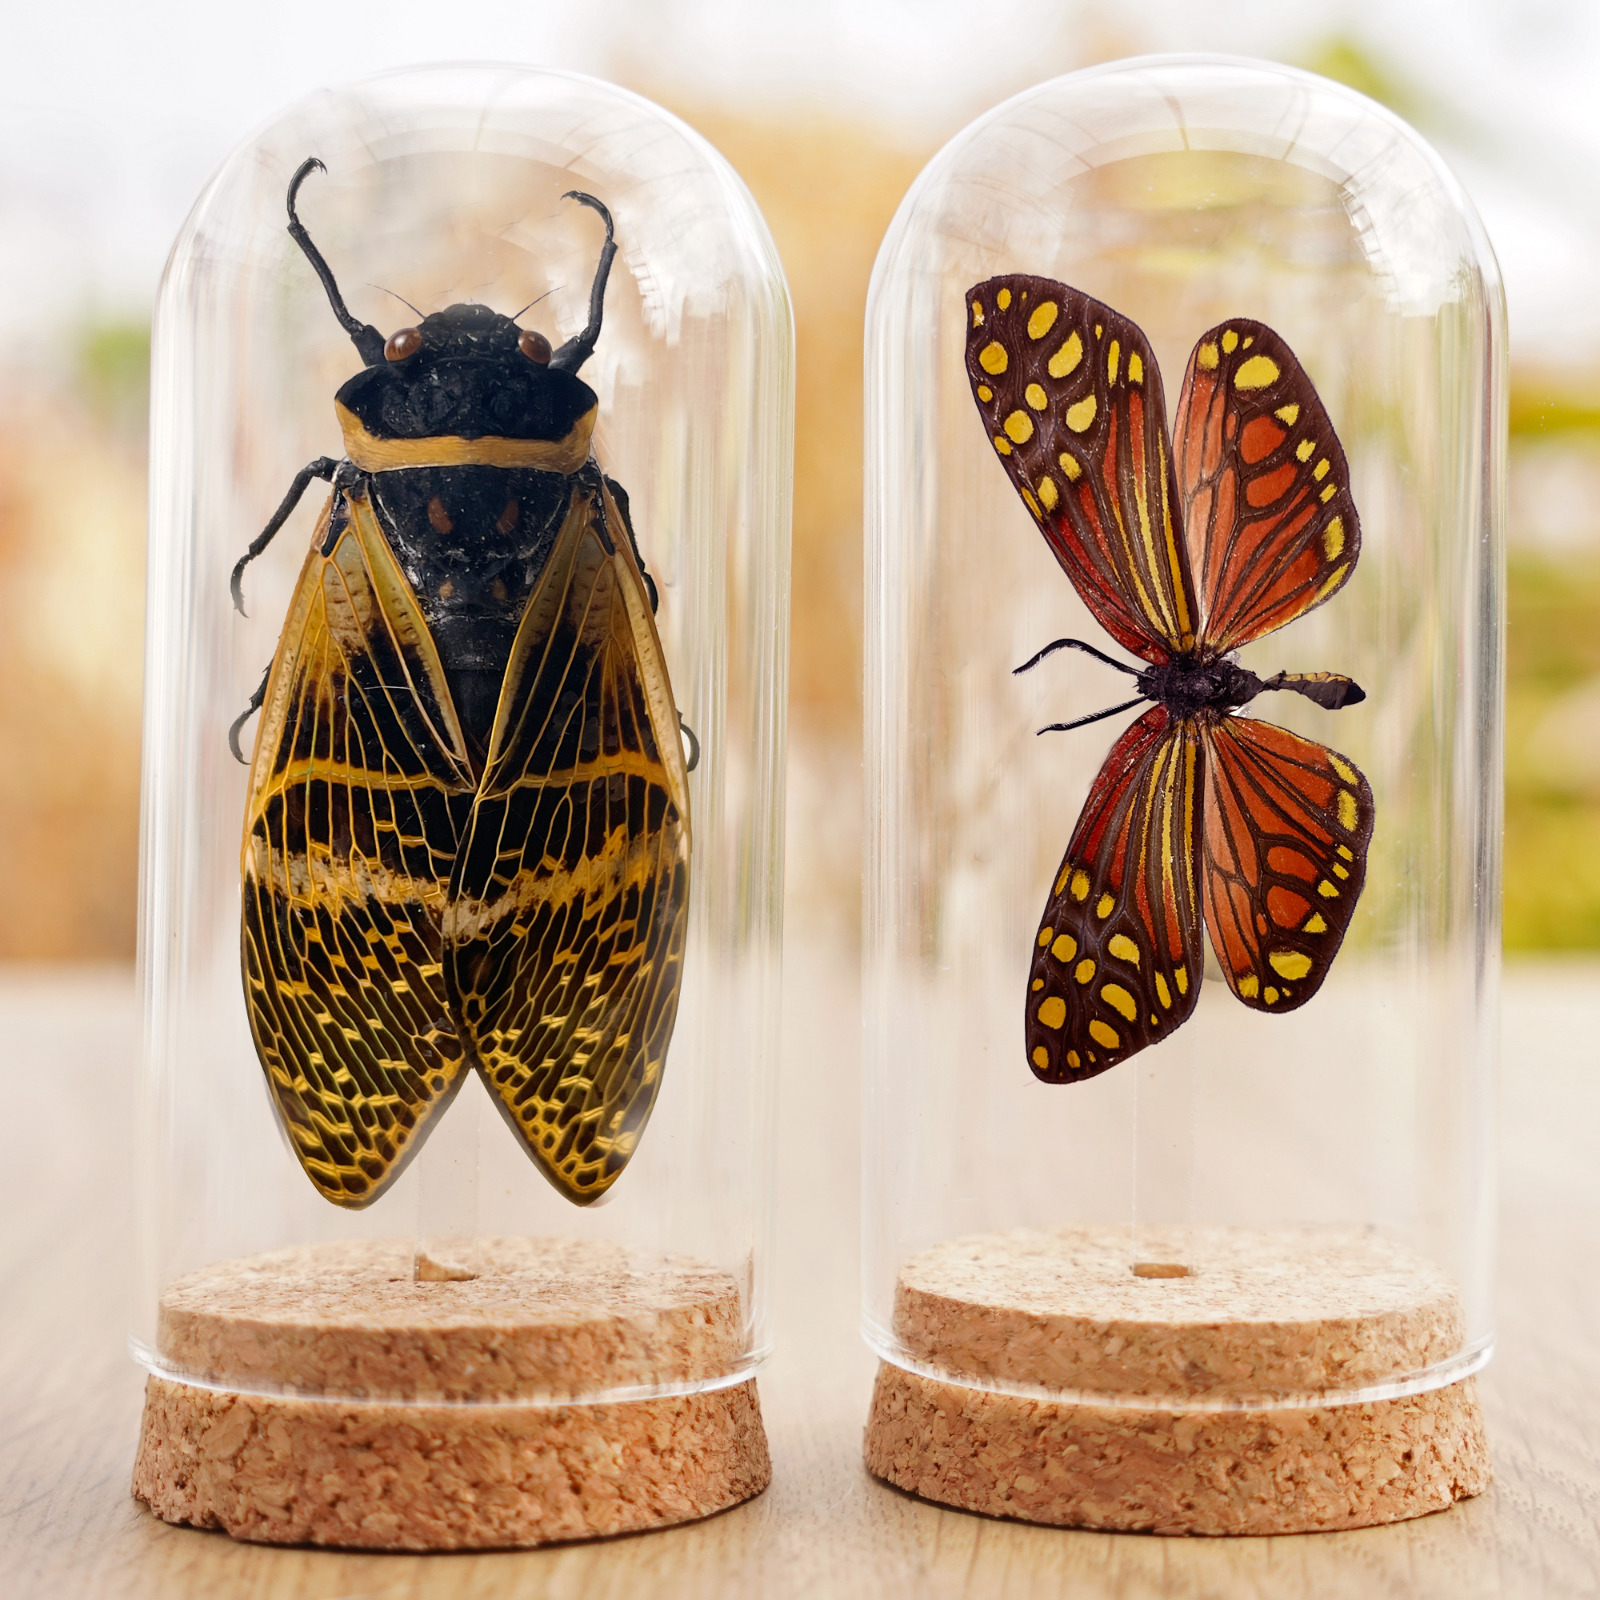 2 Real Dried Cicada & Butterfly Specimen Insect Glass Dome Gothic Art Decor